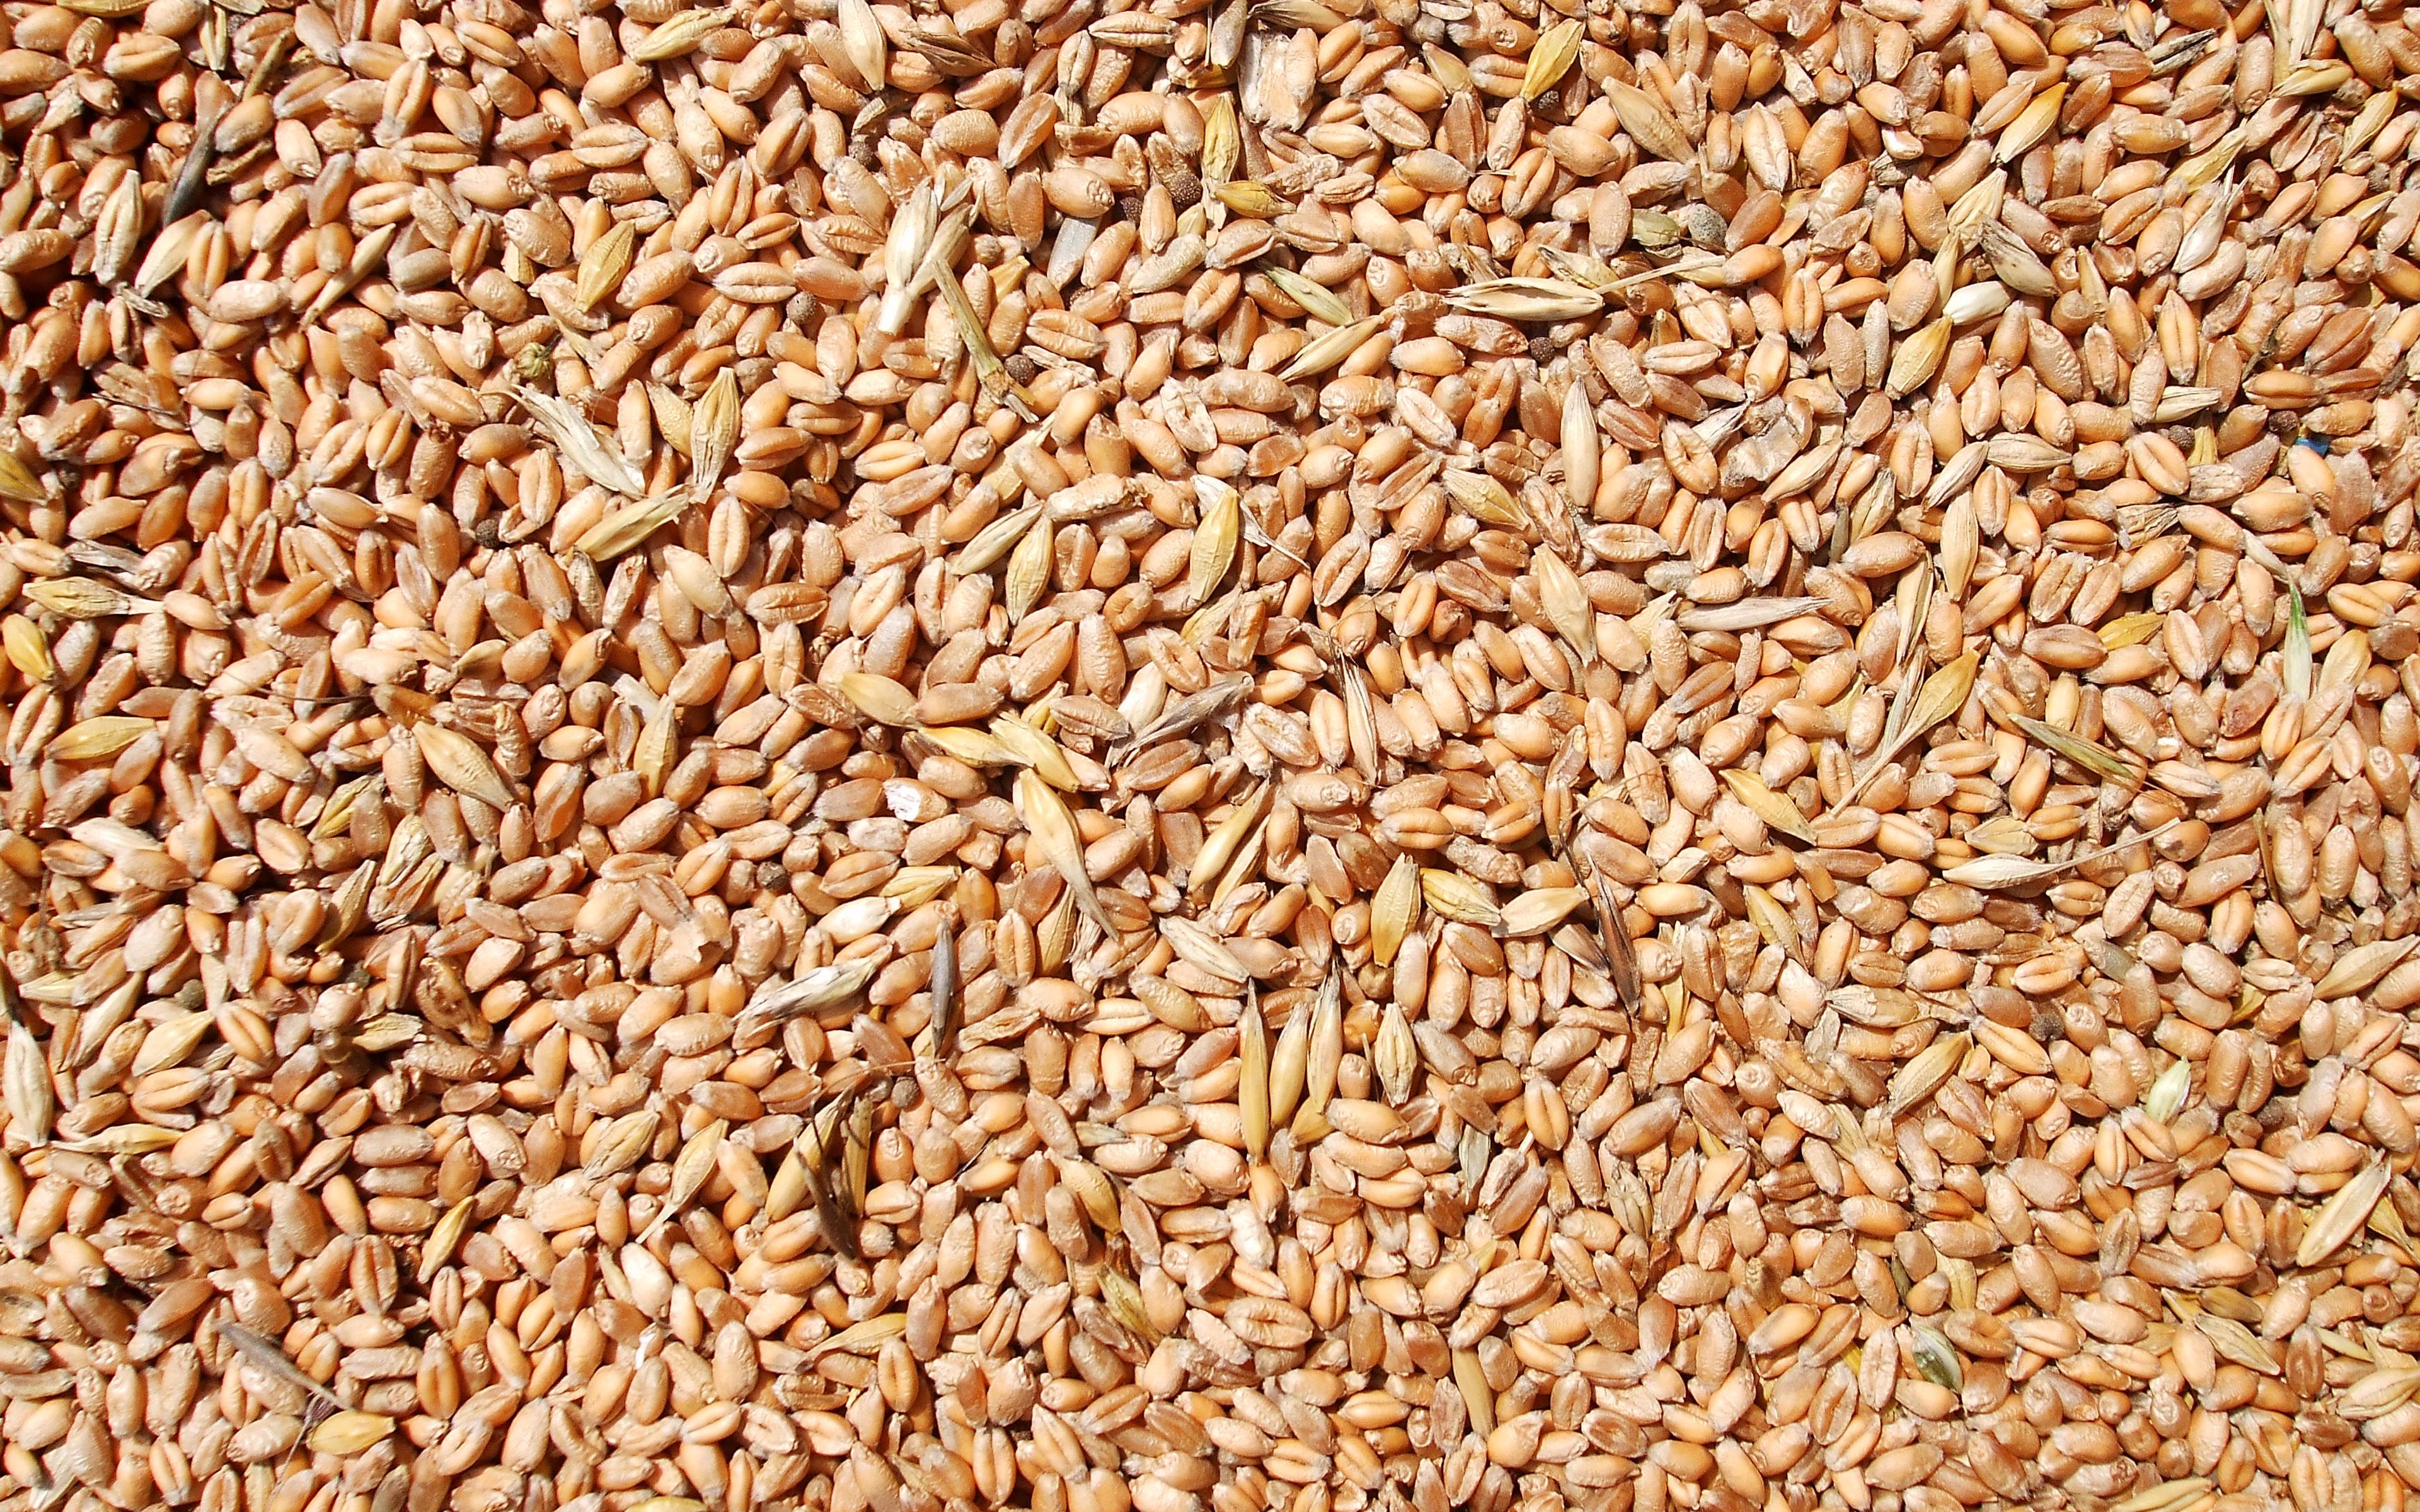 Download Wallpaper 4k, Wheat Grains, Macro, Wheat Textures, Cereals, Food Textures, Close Up, Groats Textures, Wheat Background For Desktop With Resolution 3840x2400. High Quality HD Picture Wallpaper